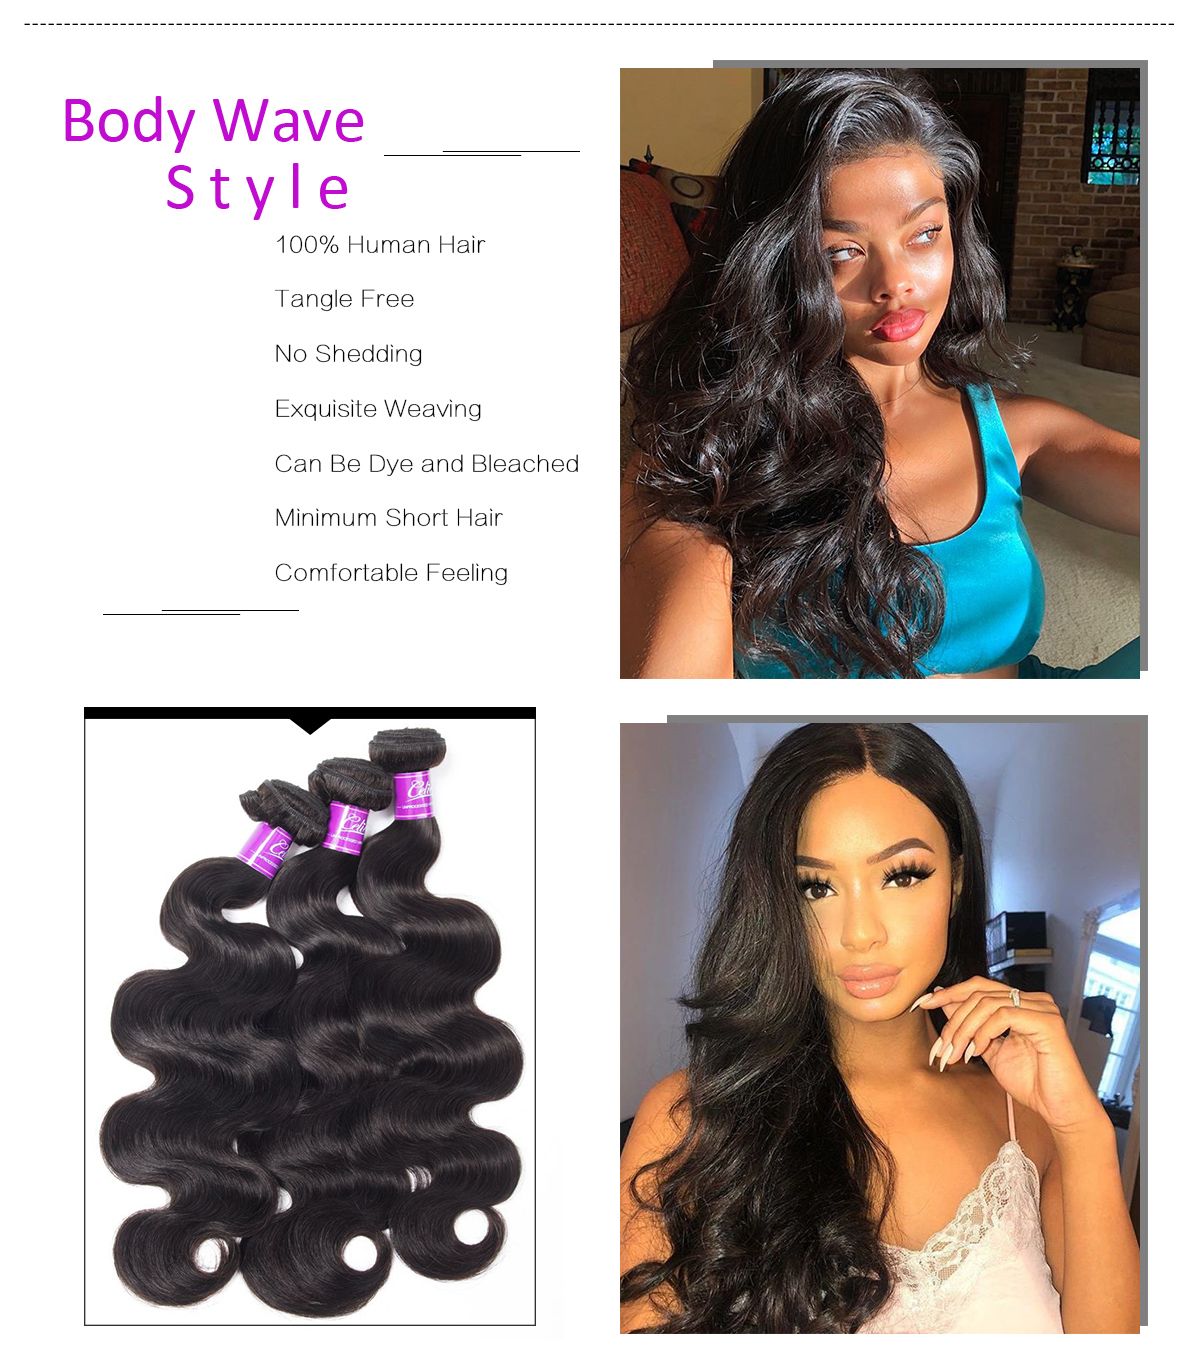 Body Wave 3 Bundles With Frontal